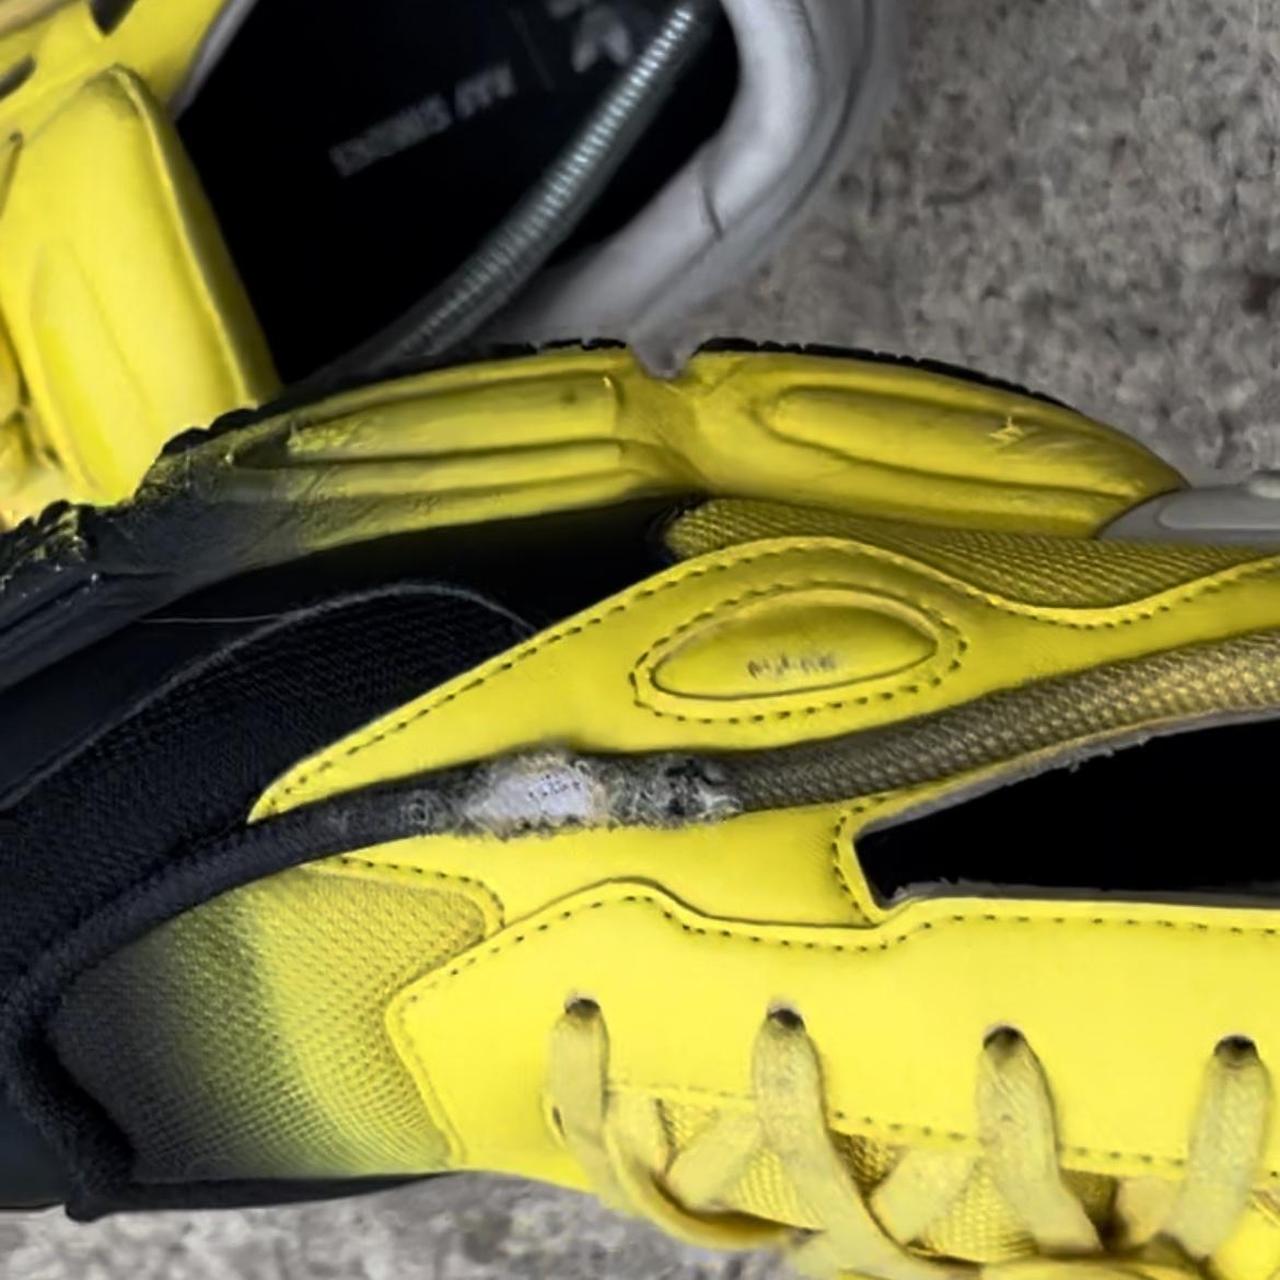 Raf Simons Men's Yellow and Black Trainers (4)